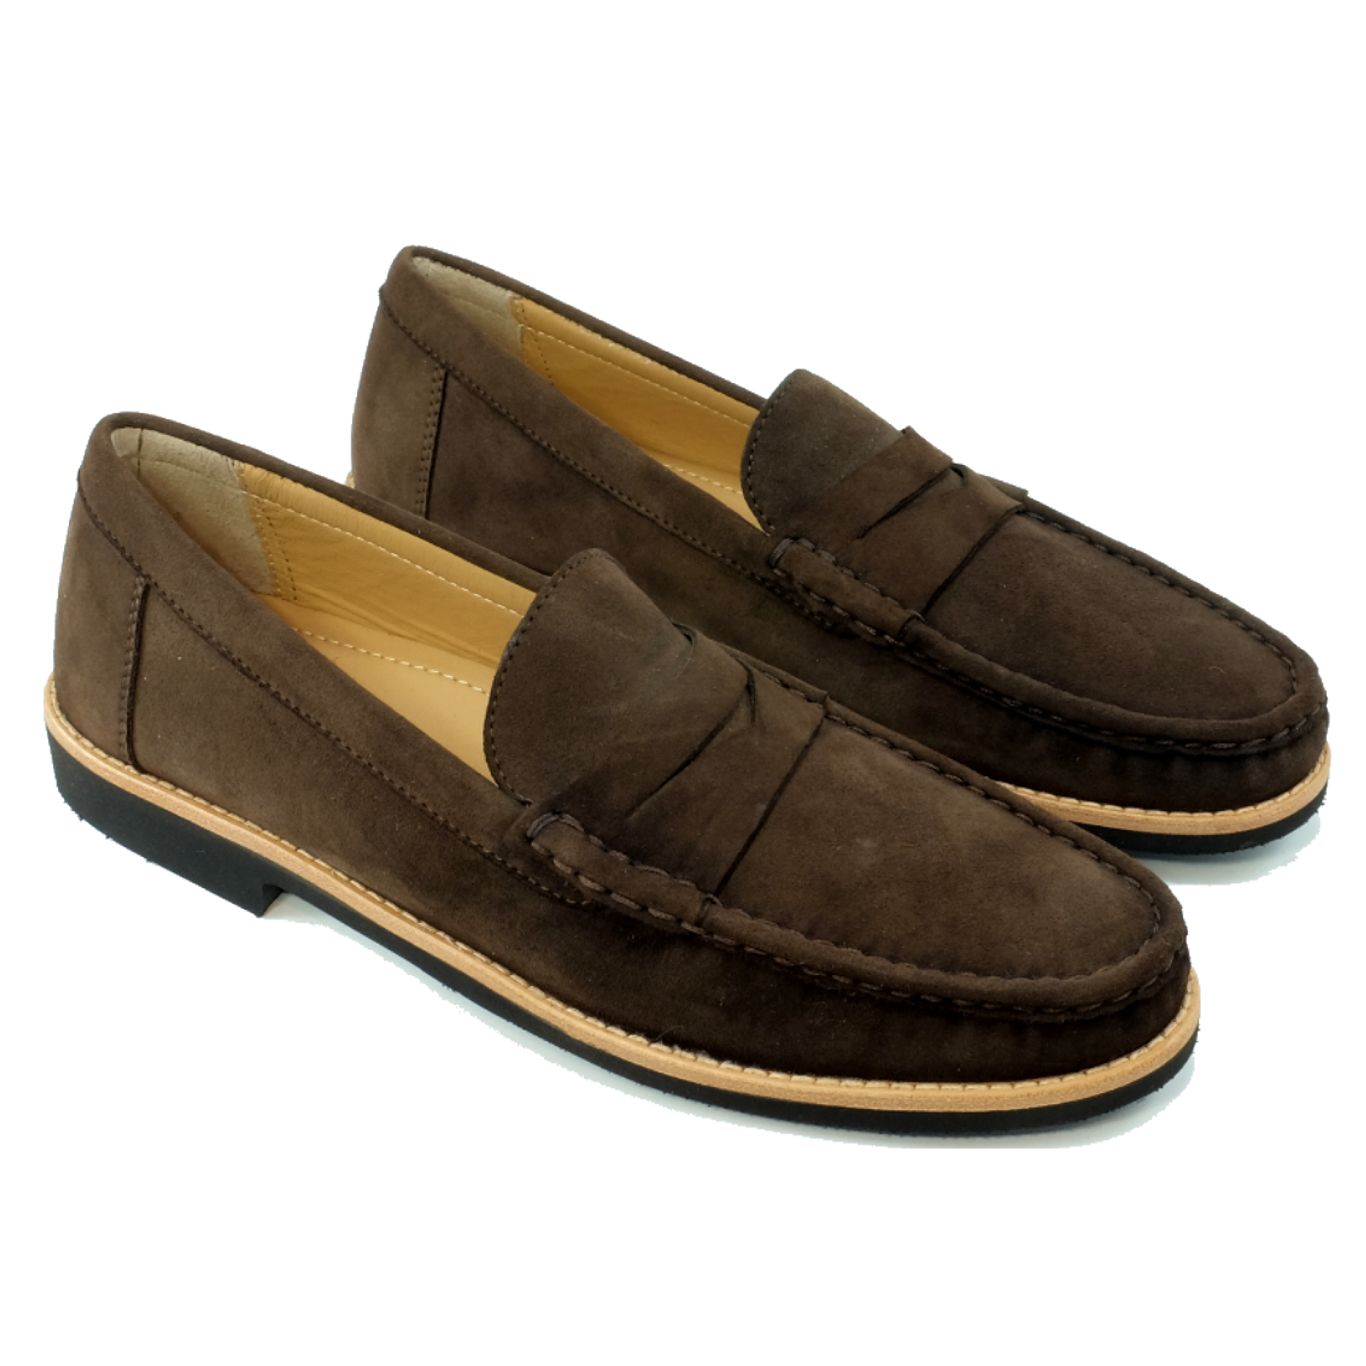 Worchester Suede Penny Loafer in Brown by Alan Payne Footwear